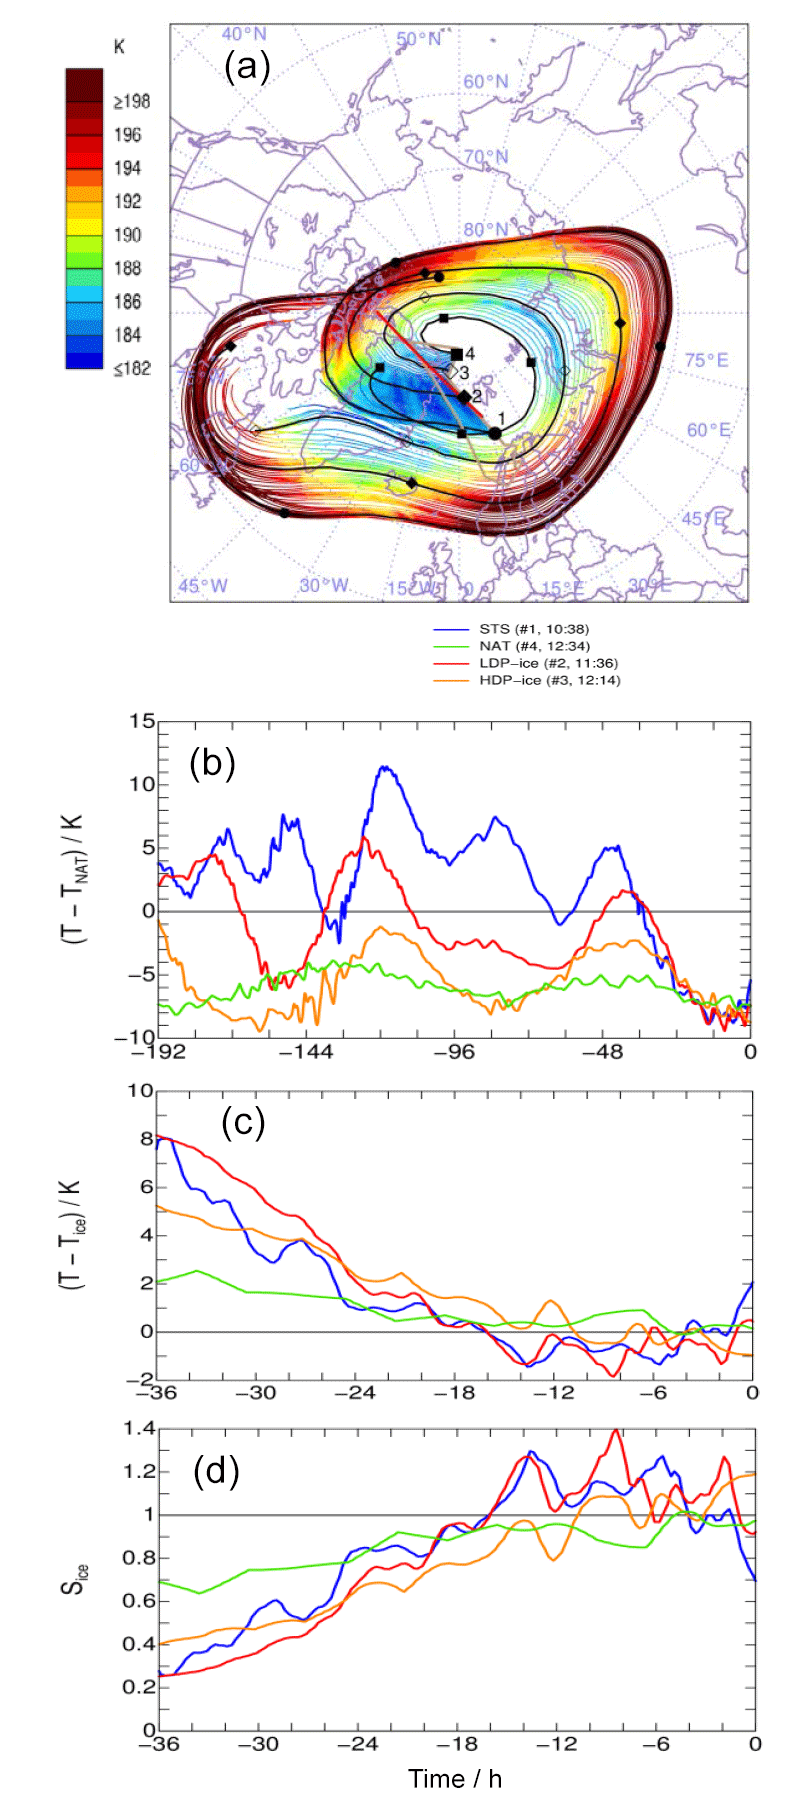 Acp Widespread Polar Stratospheric Ice Clouds In The 2015 2016